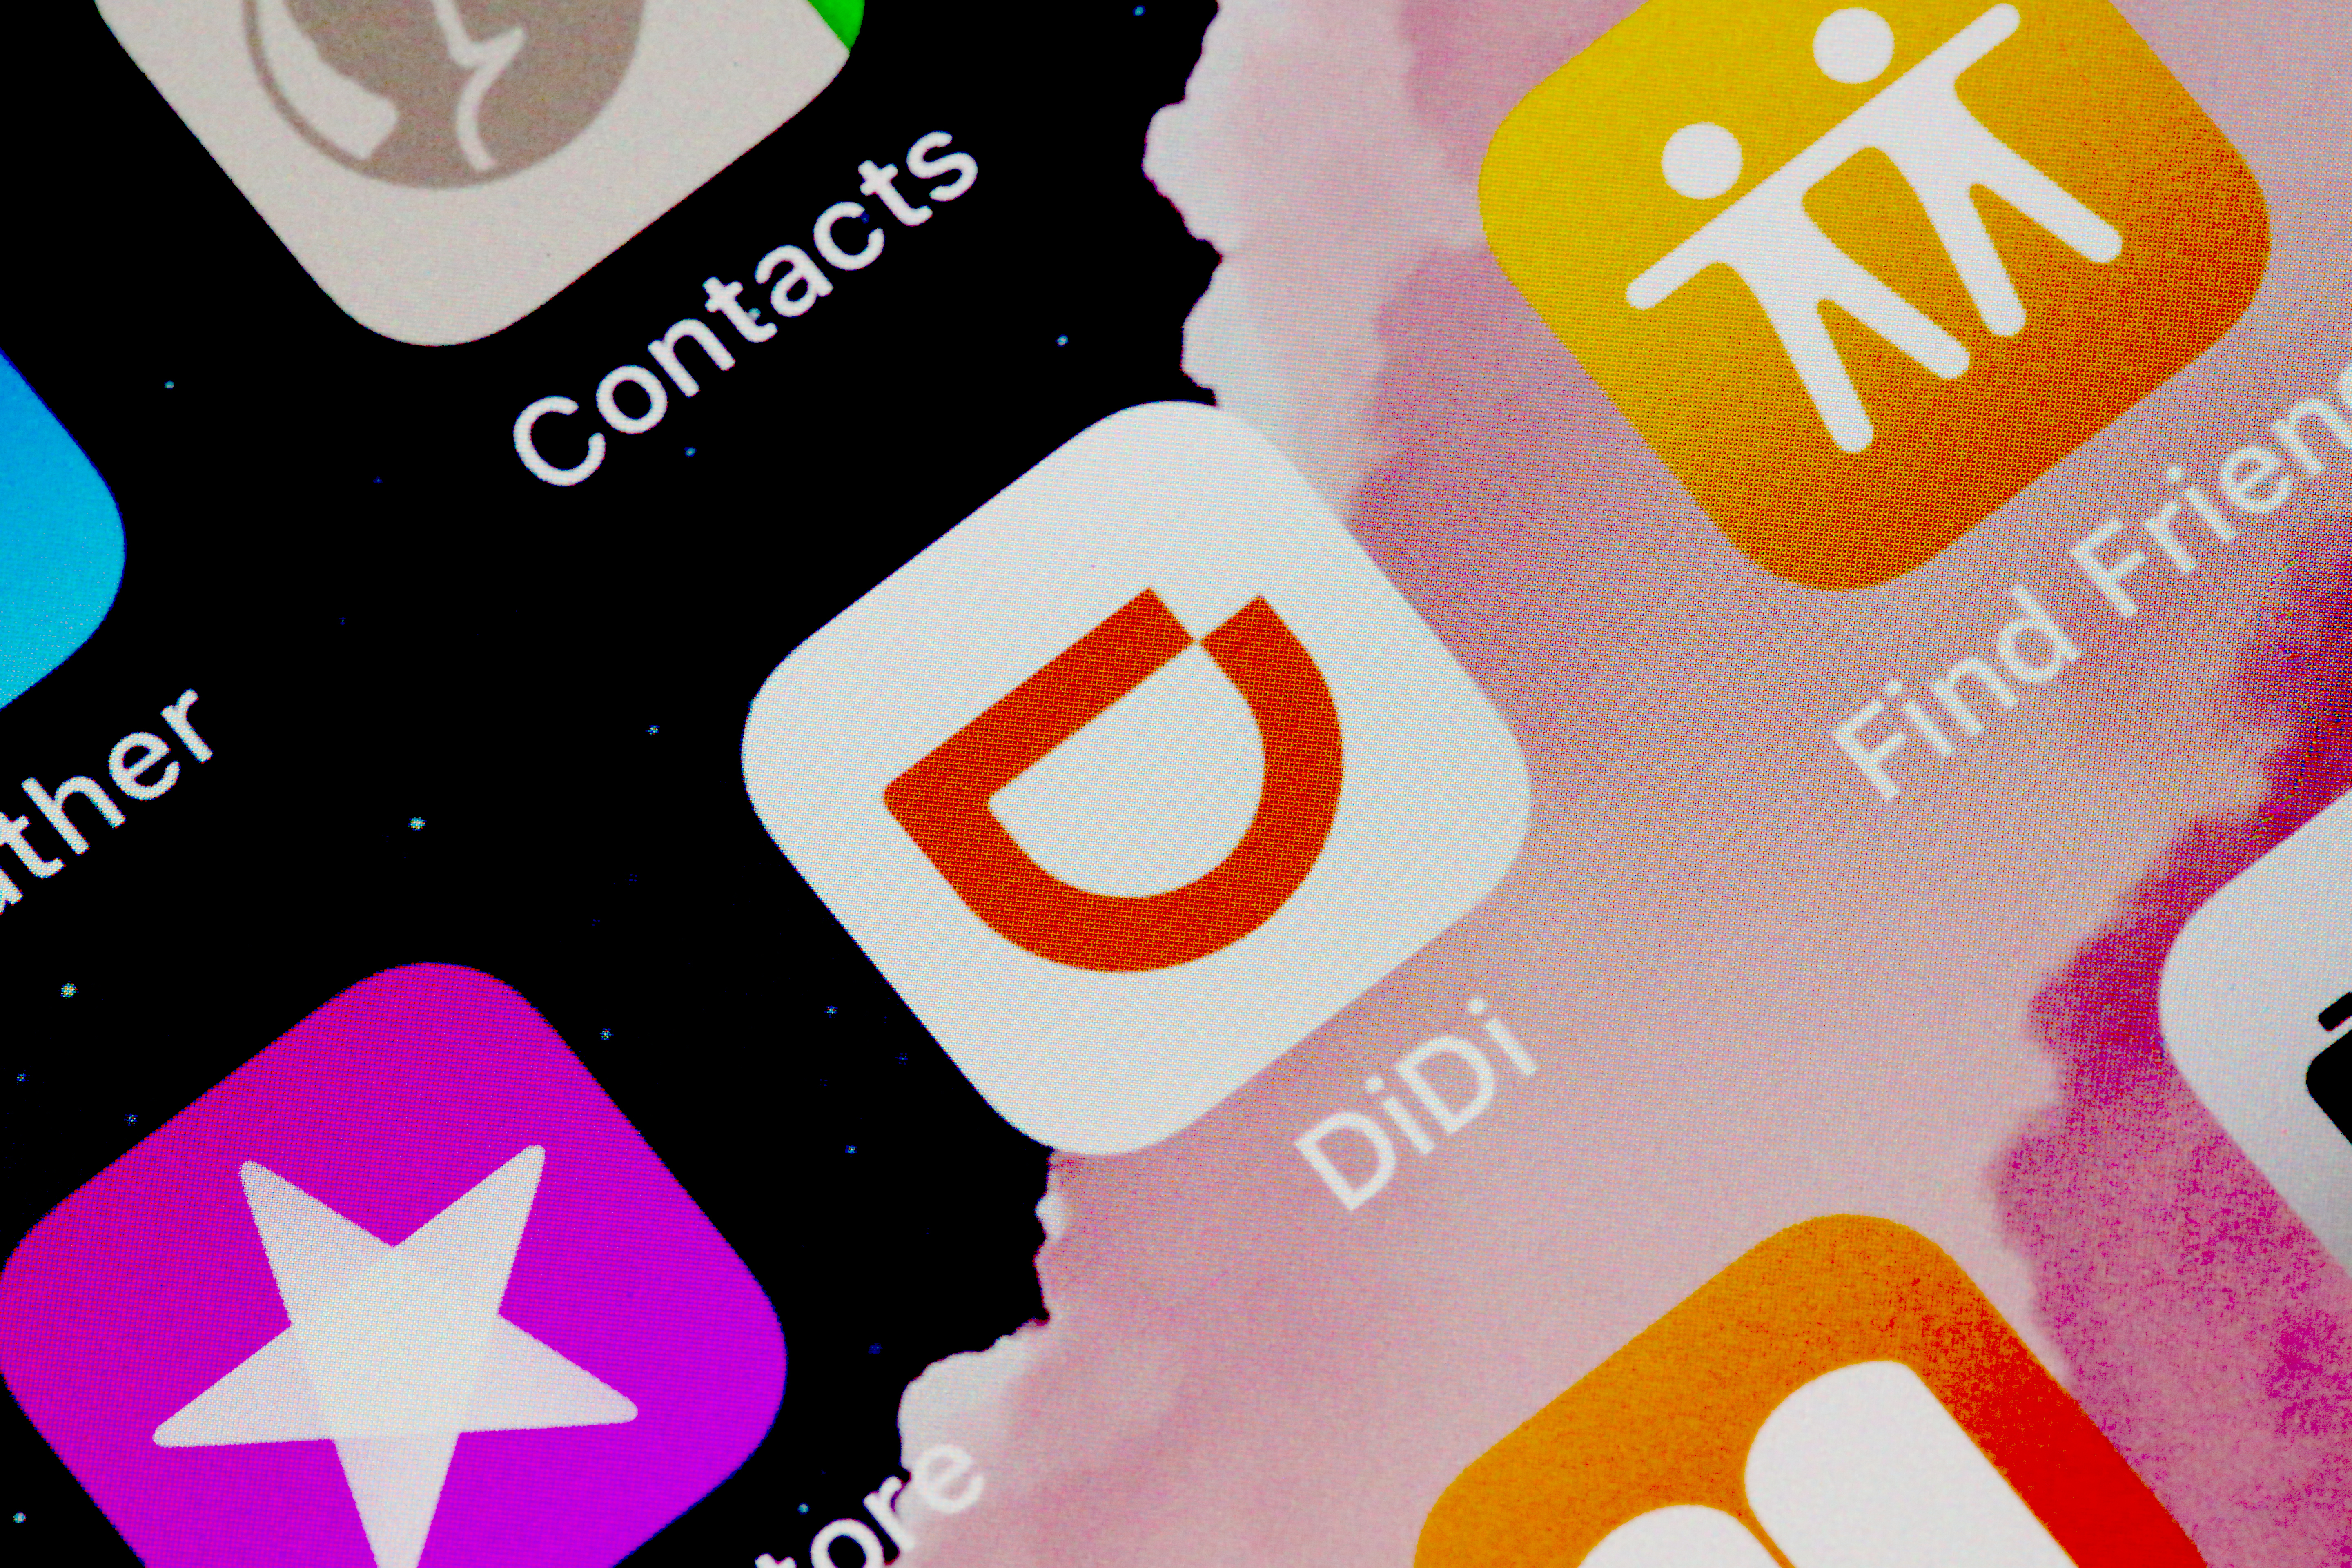 Didi Chuxing Kicking off Car-Rental Service and Who Still Wants to Own A Car?